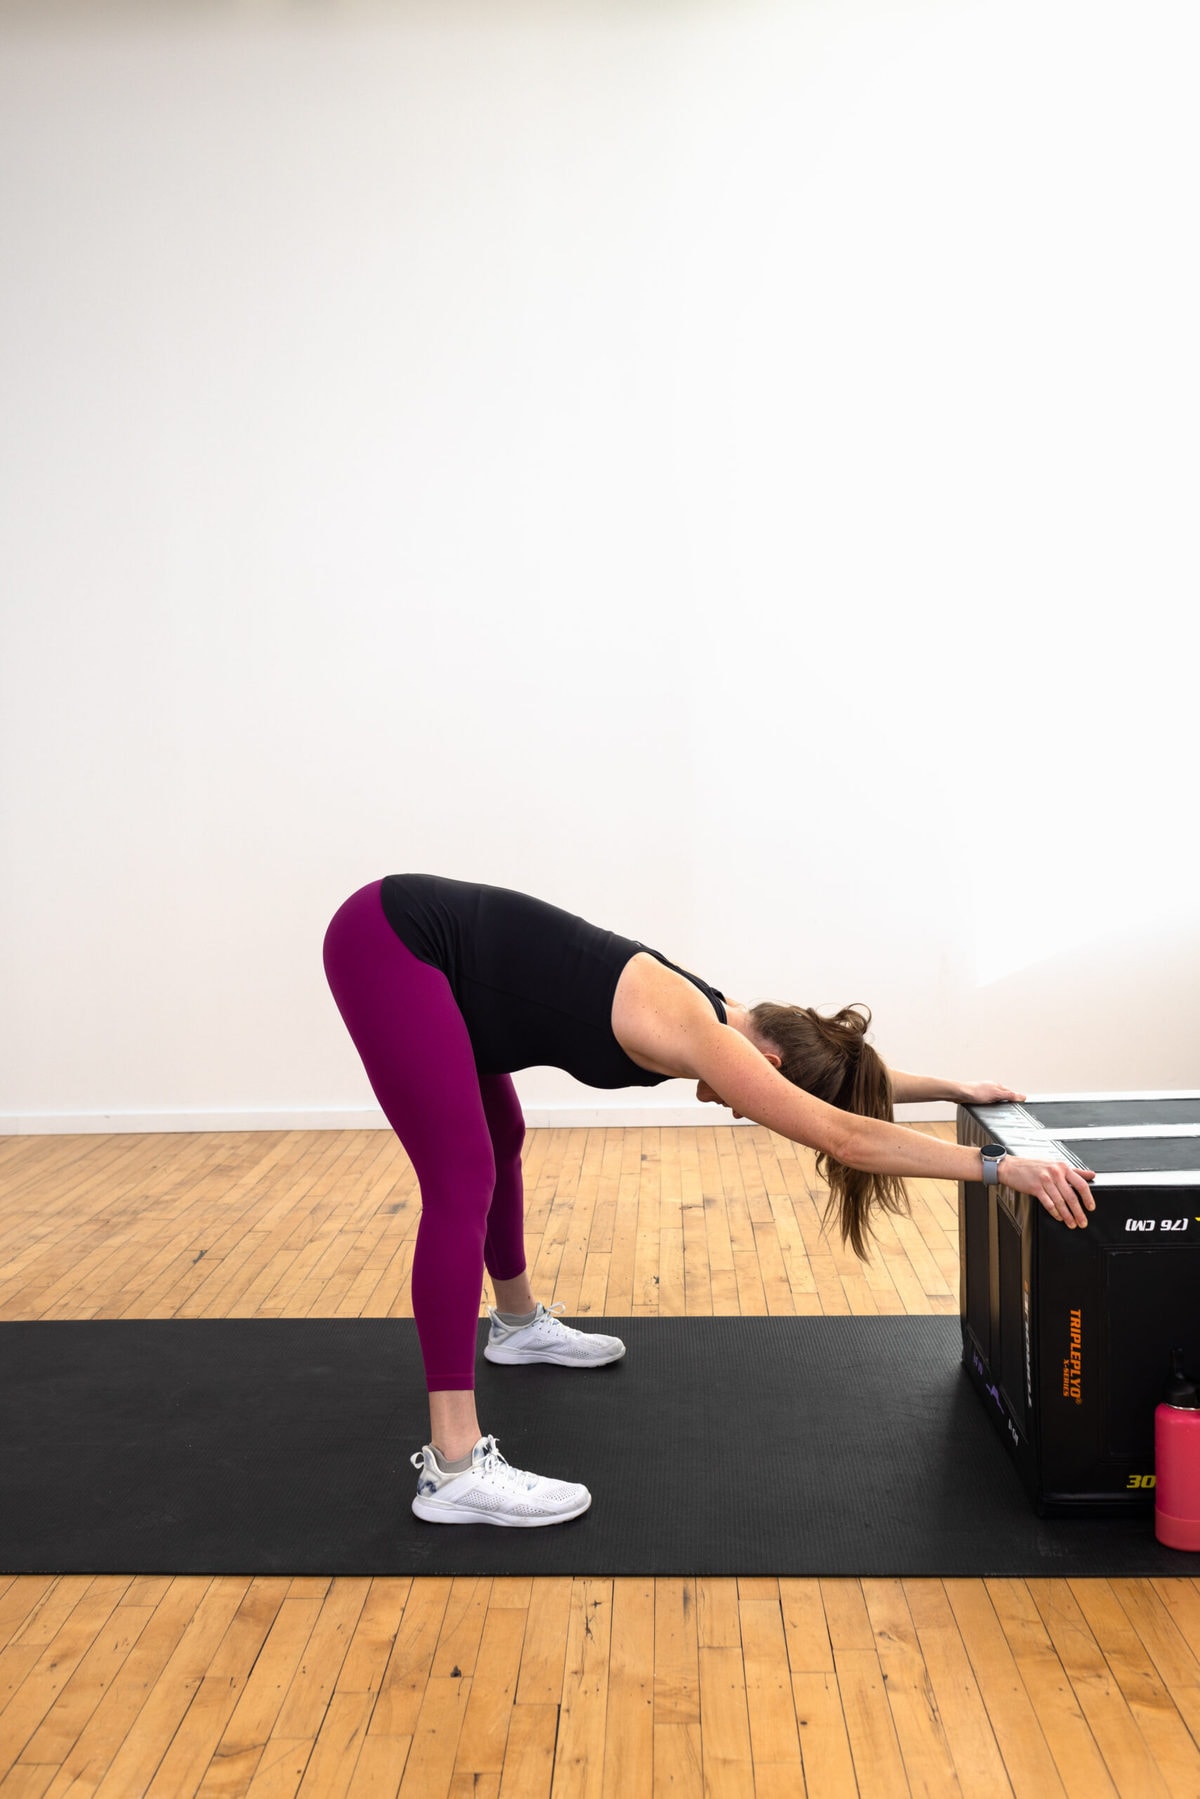 3 Amazing Stretches for Tight Hips, Legs & Lower Back Tension